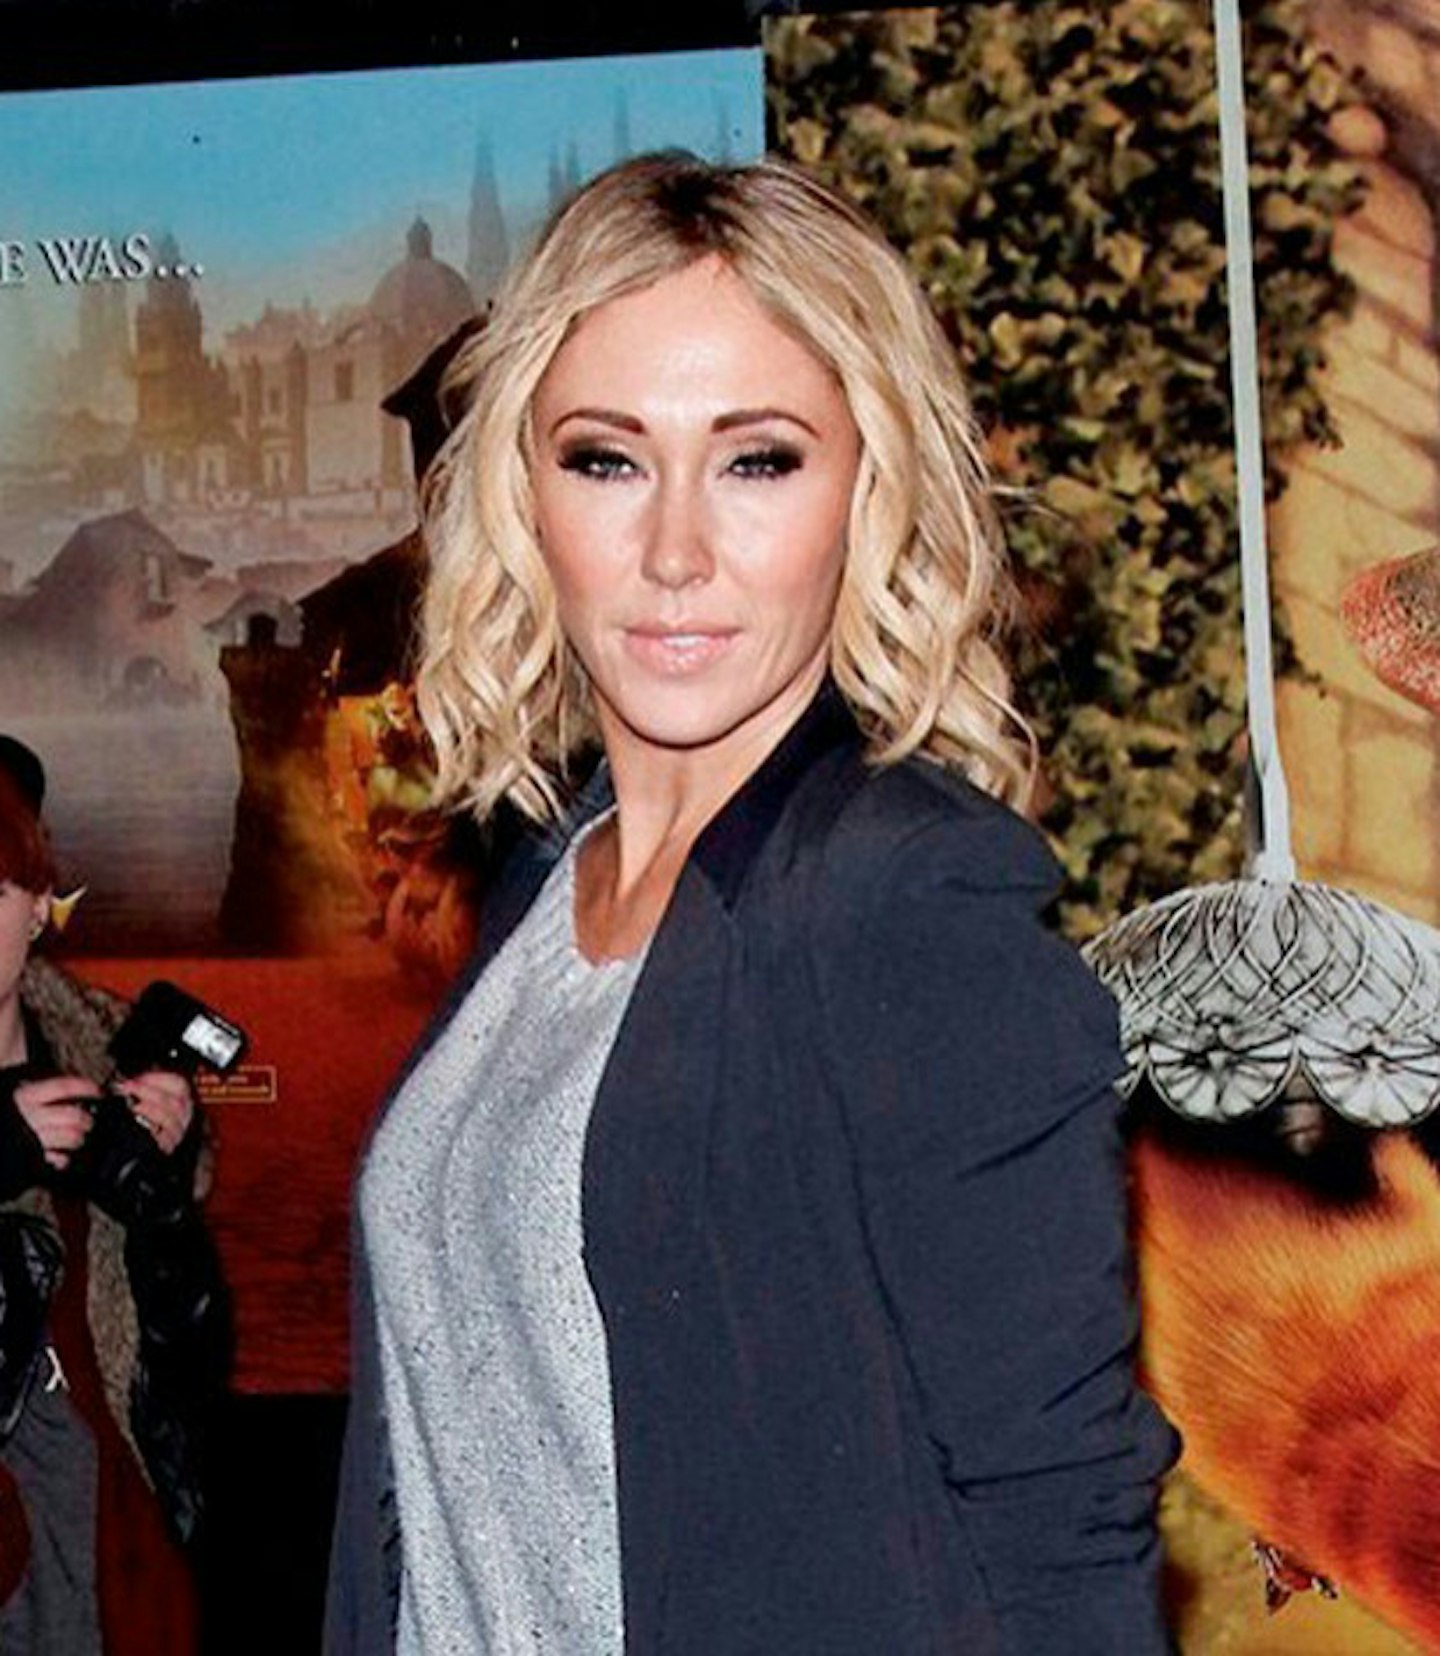 January 2013: Jenny Frost welcomed twin daughters Blake and Nico